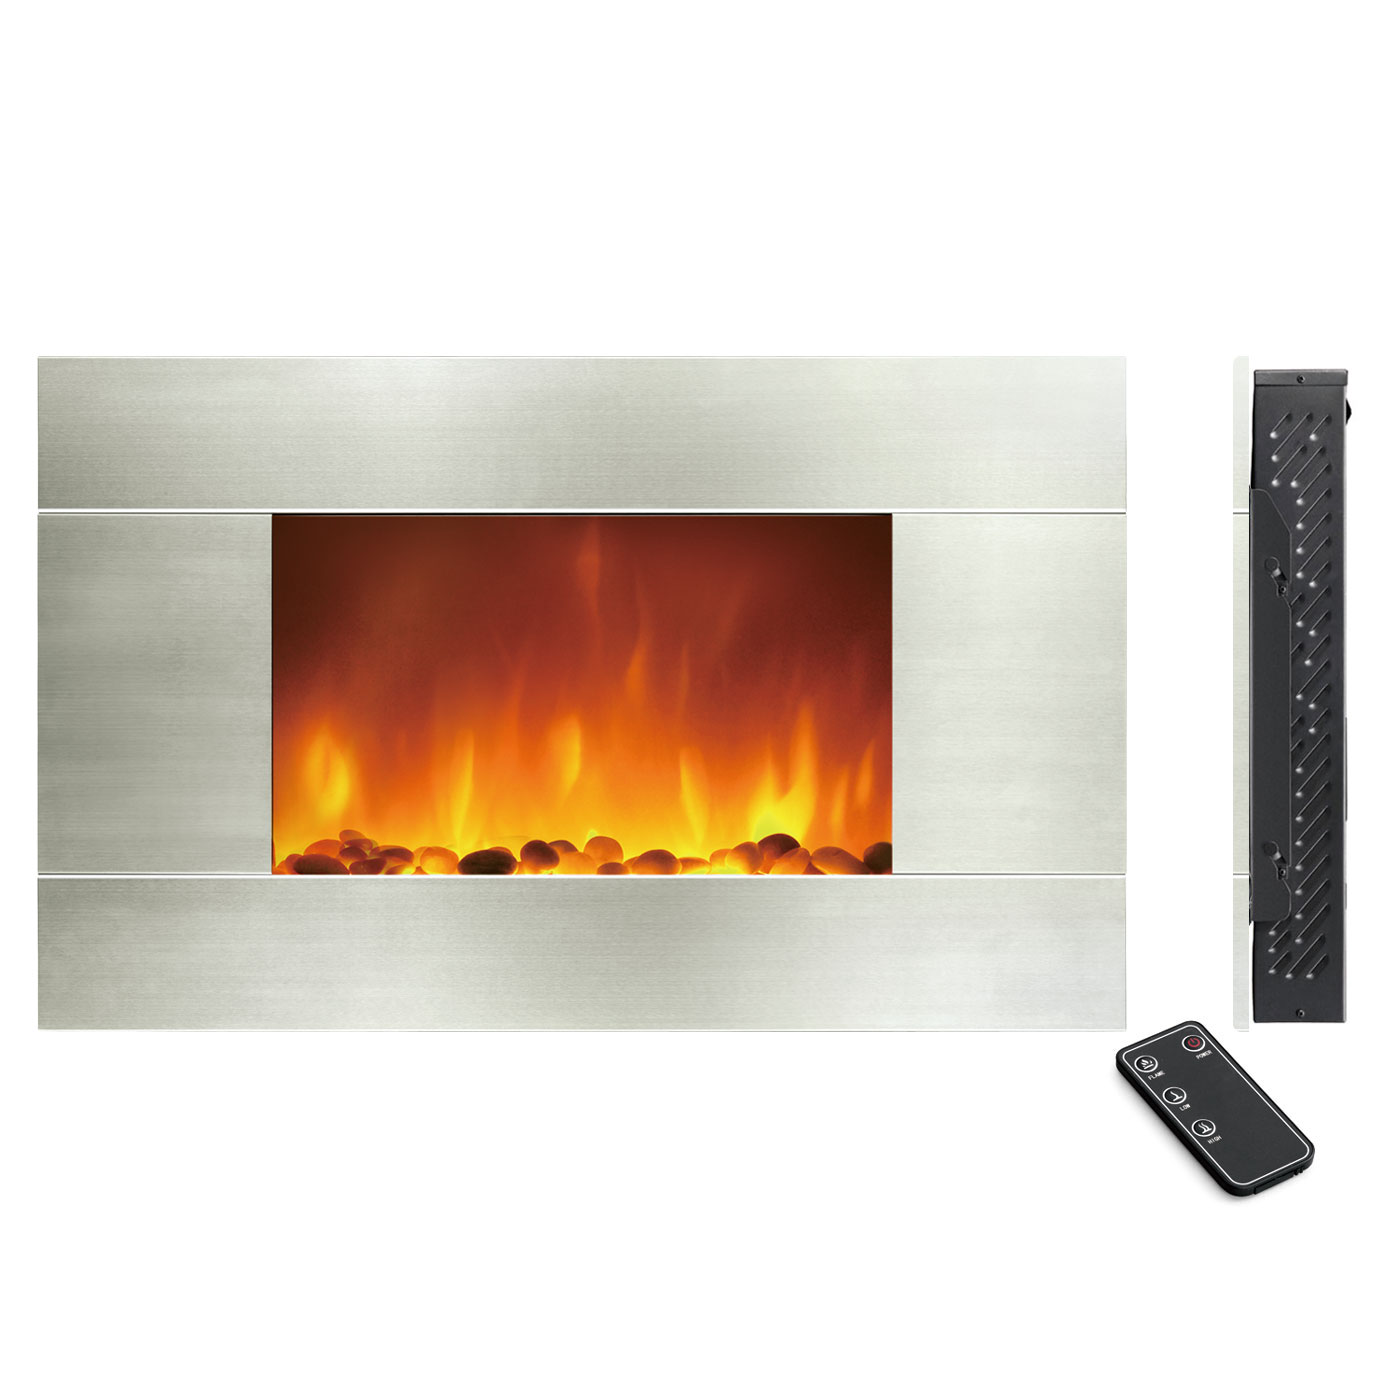 Full Stainless Steel panel Electrical Fireplace,wall mounted Heater